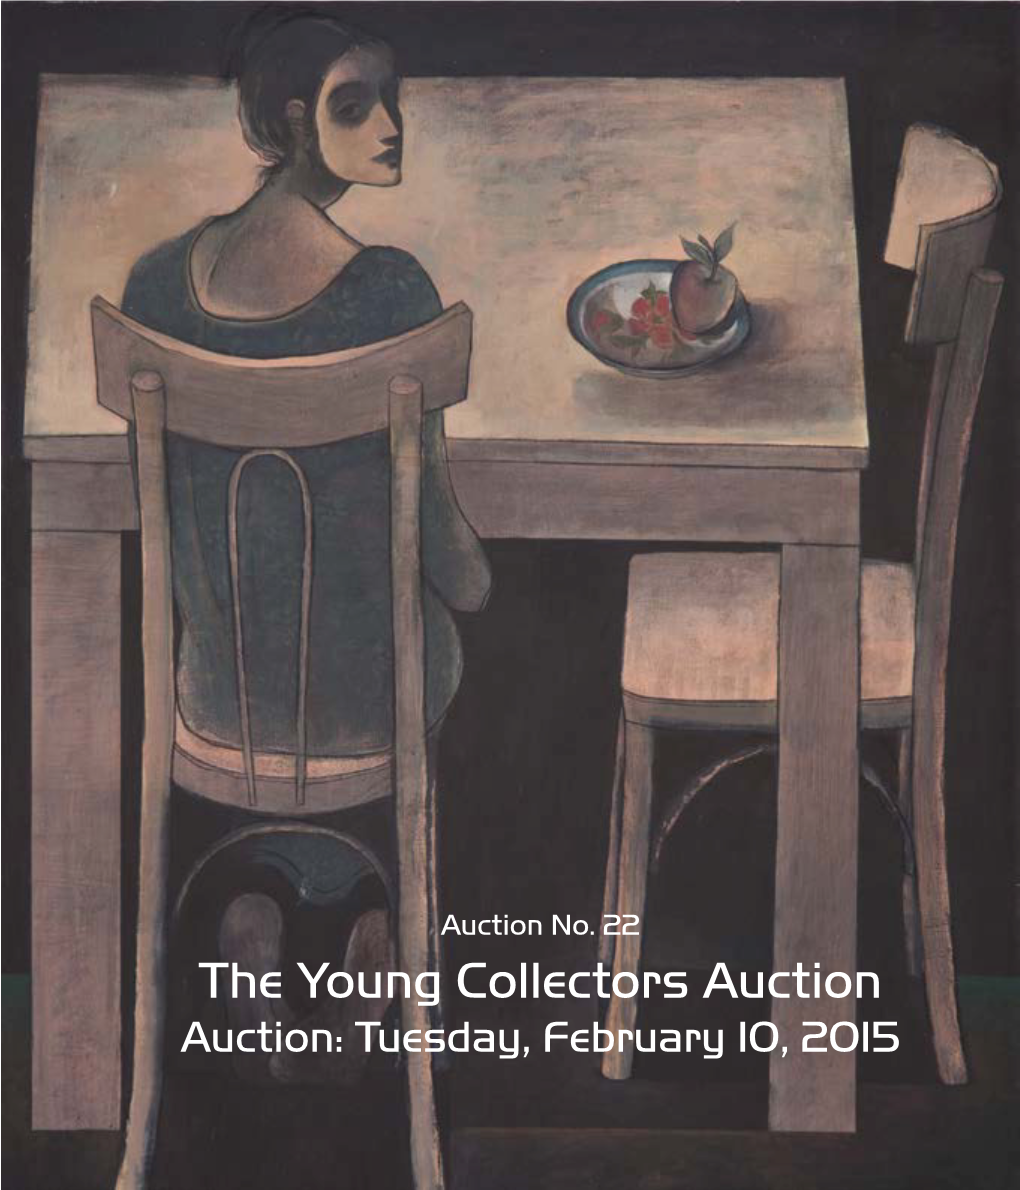 The Young Collectors Auction Auction: Tuesday, February 10, 2015 Auction No